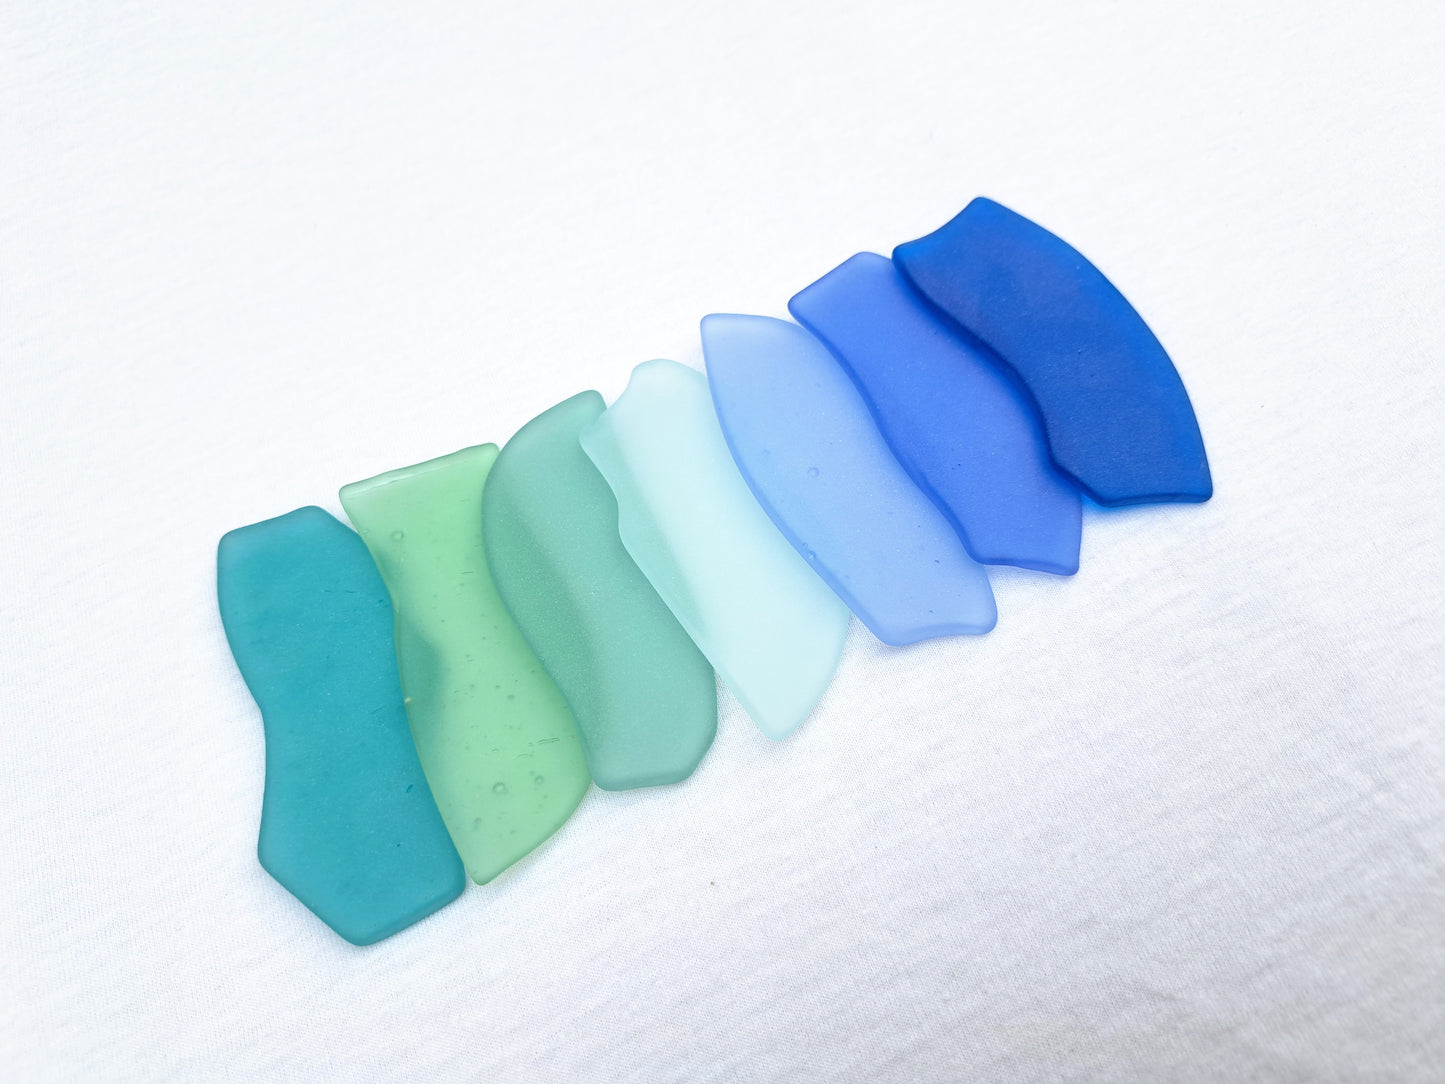 Blue & green sea glass place cards - Set of 20 - Irregular shaped pieces